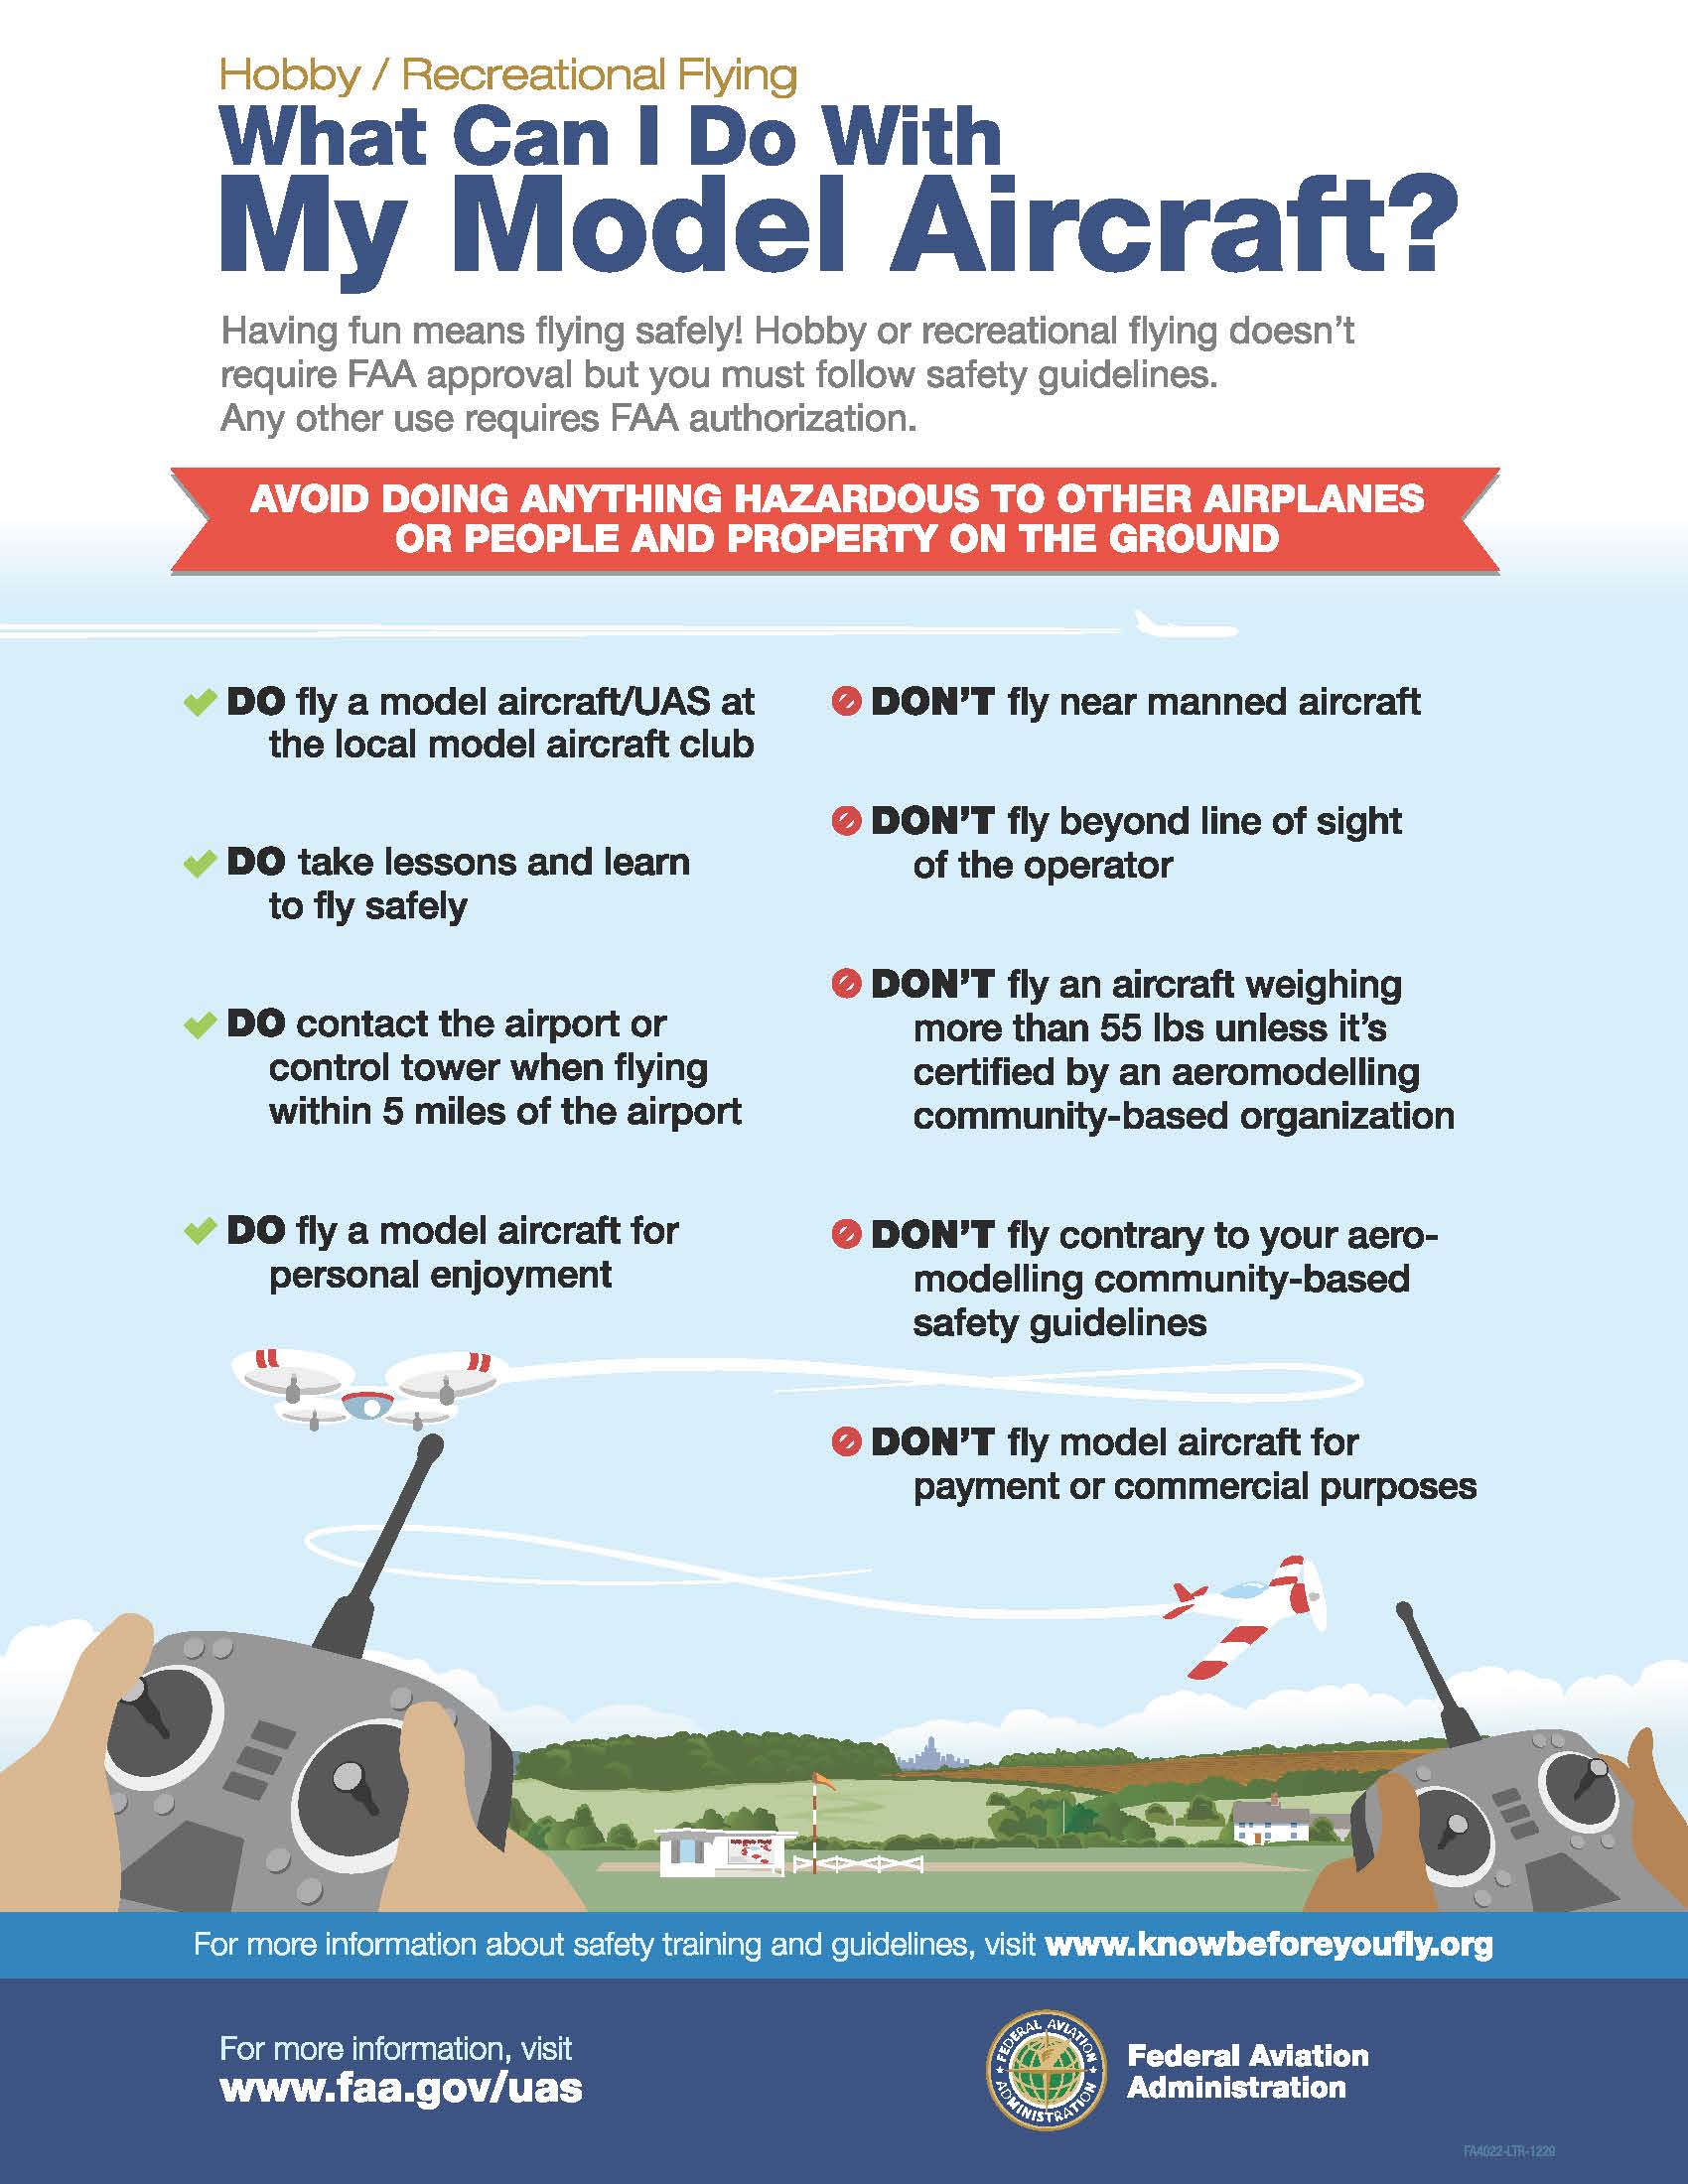 Do's and Don'ts of Model Aircraft Flying